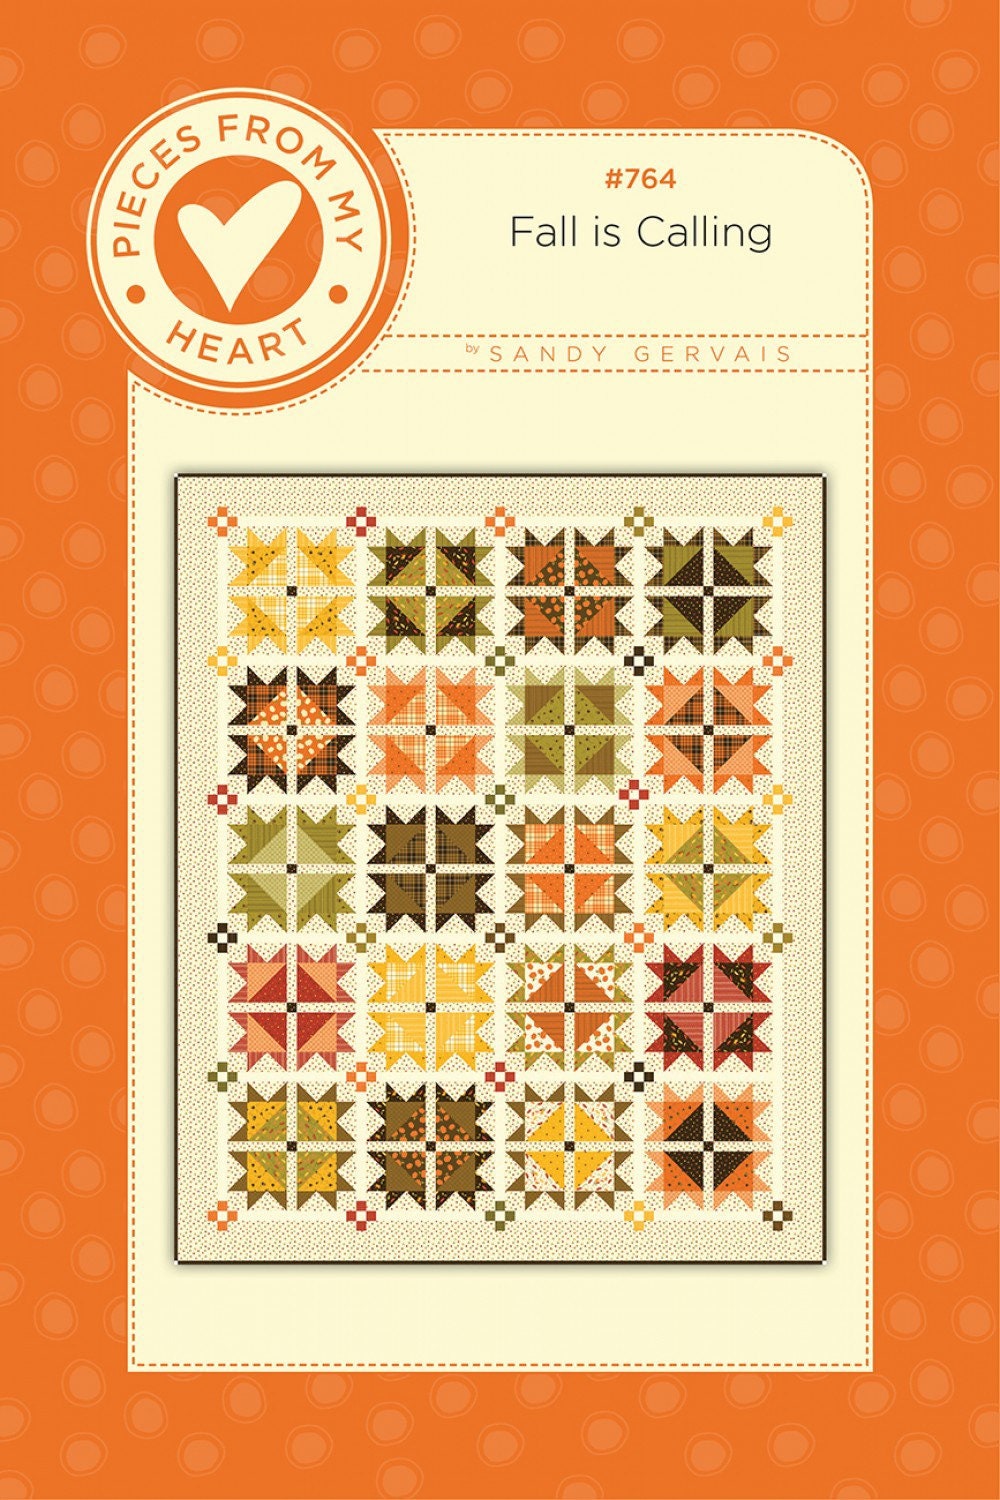 Fall is Calling Quilt Pattern - Sandy Gervais - Pieces From My Heart - Made with Awesome Autumn Fabric - Fat Quarter Friendly - 65” x 78”